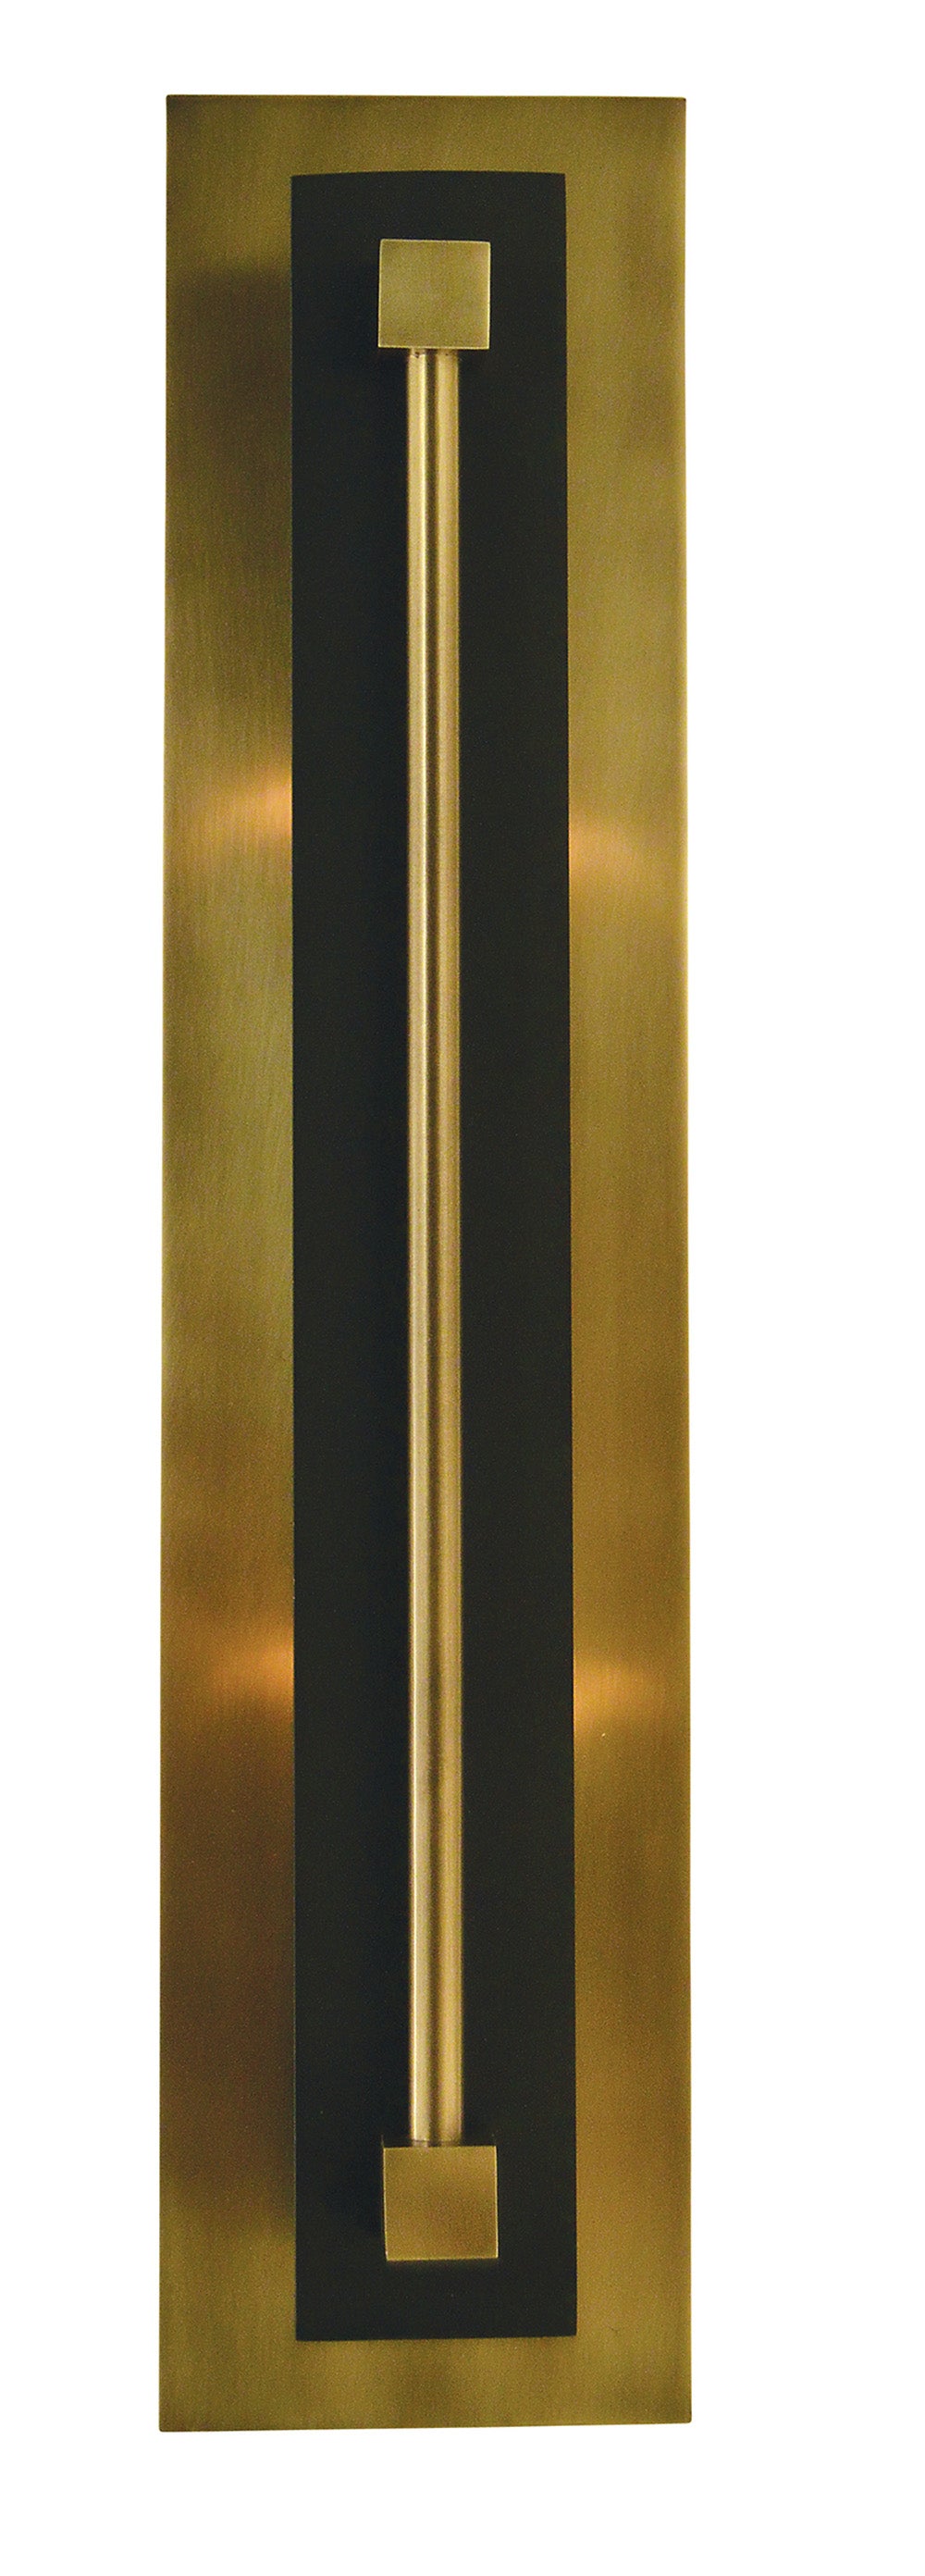 Framburg Louvre 2 - Light Antique Brass with Matte Black Wall Sconce 4802 AB/MBLACK